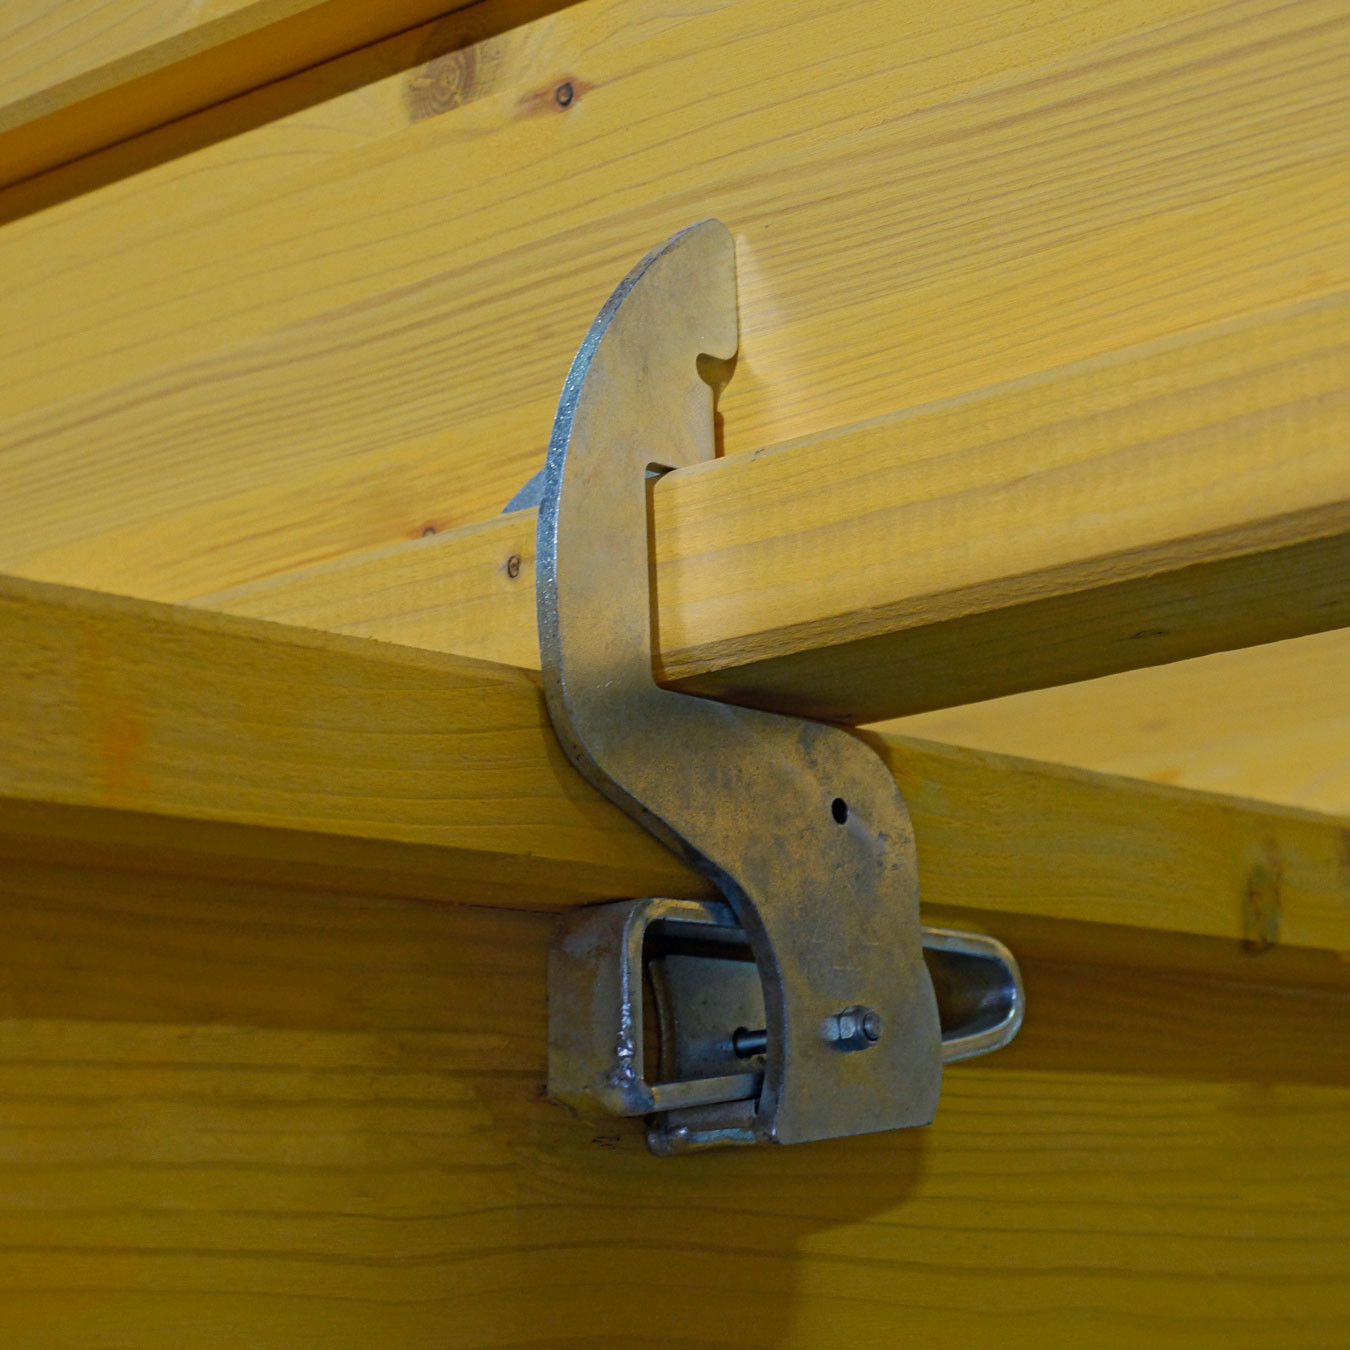 Accessory for holding panels in place for formwork construction